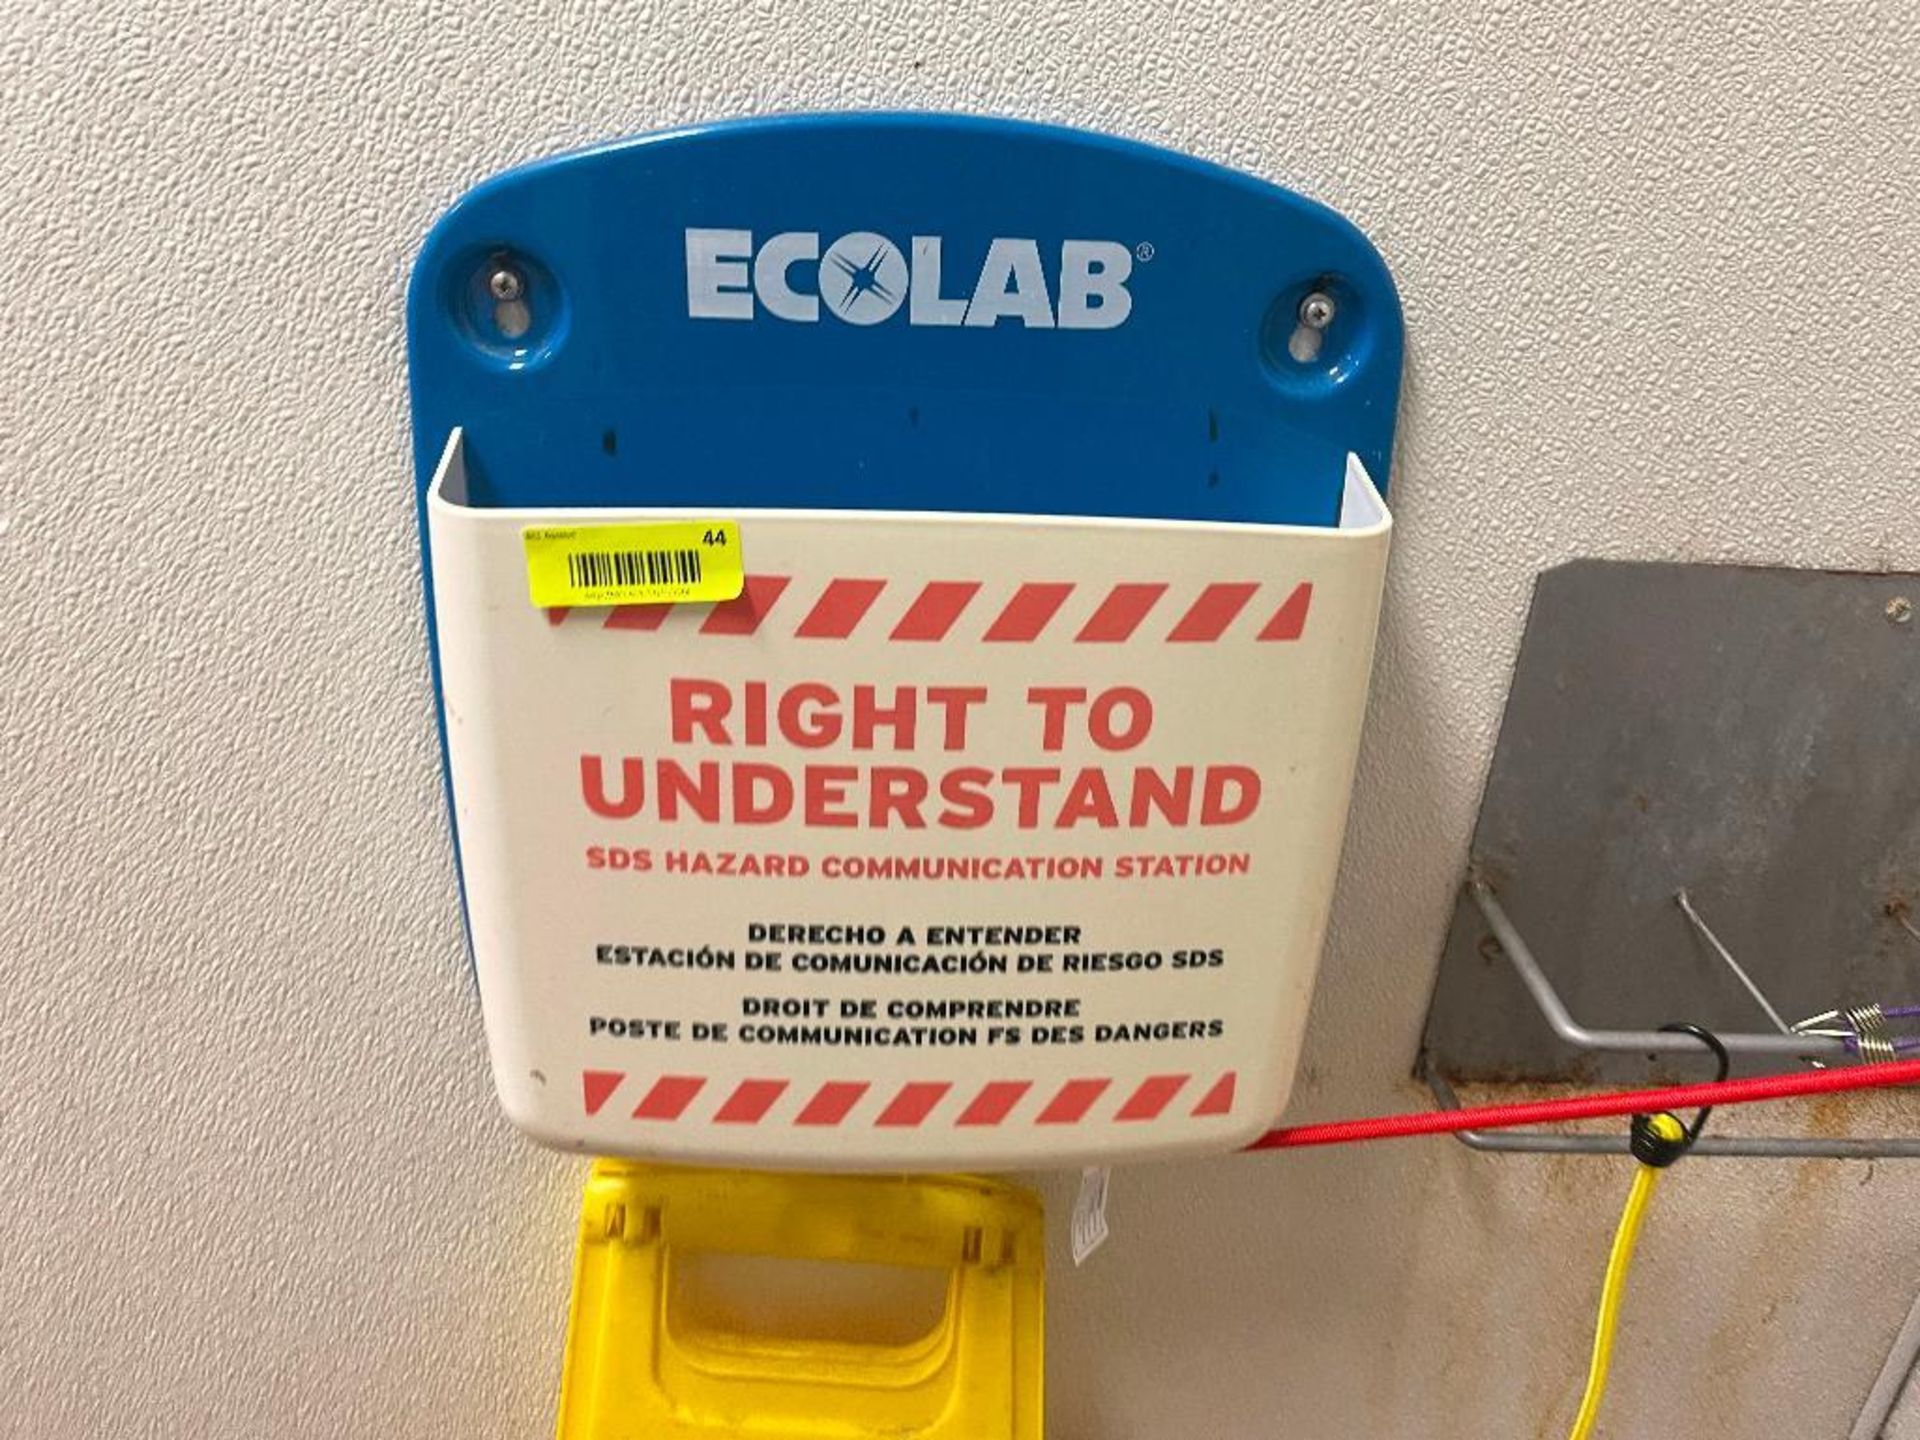 DESCRIPTION: ECOLAB WALL MOUNTED SAFETY STATION LOCATION: ALLEN TX QTY: 1